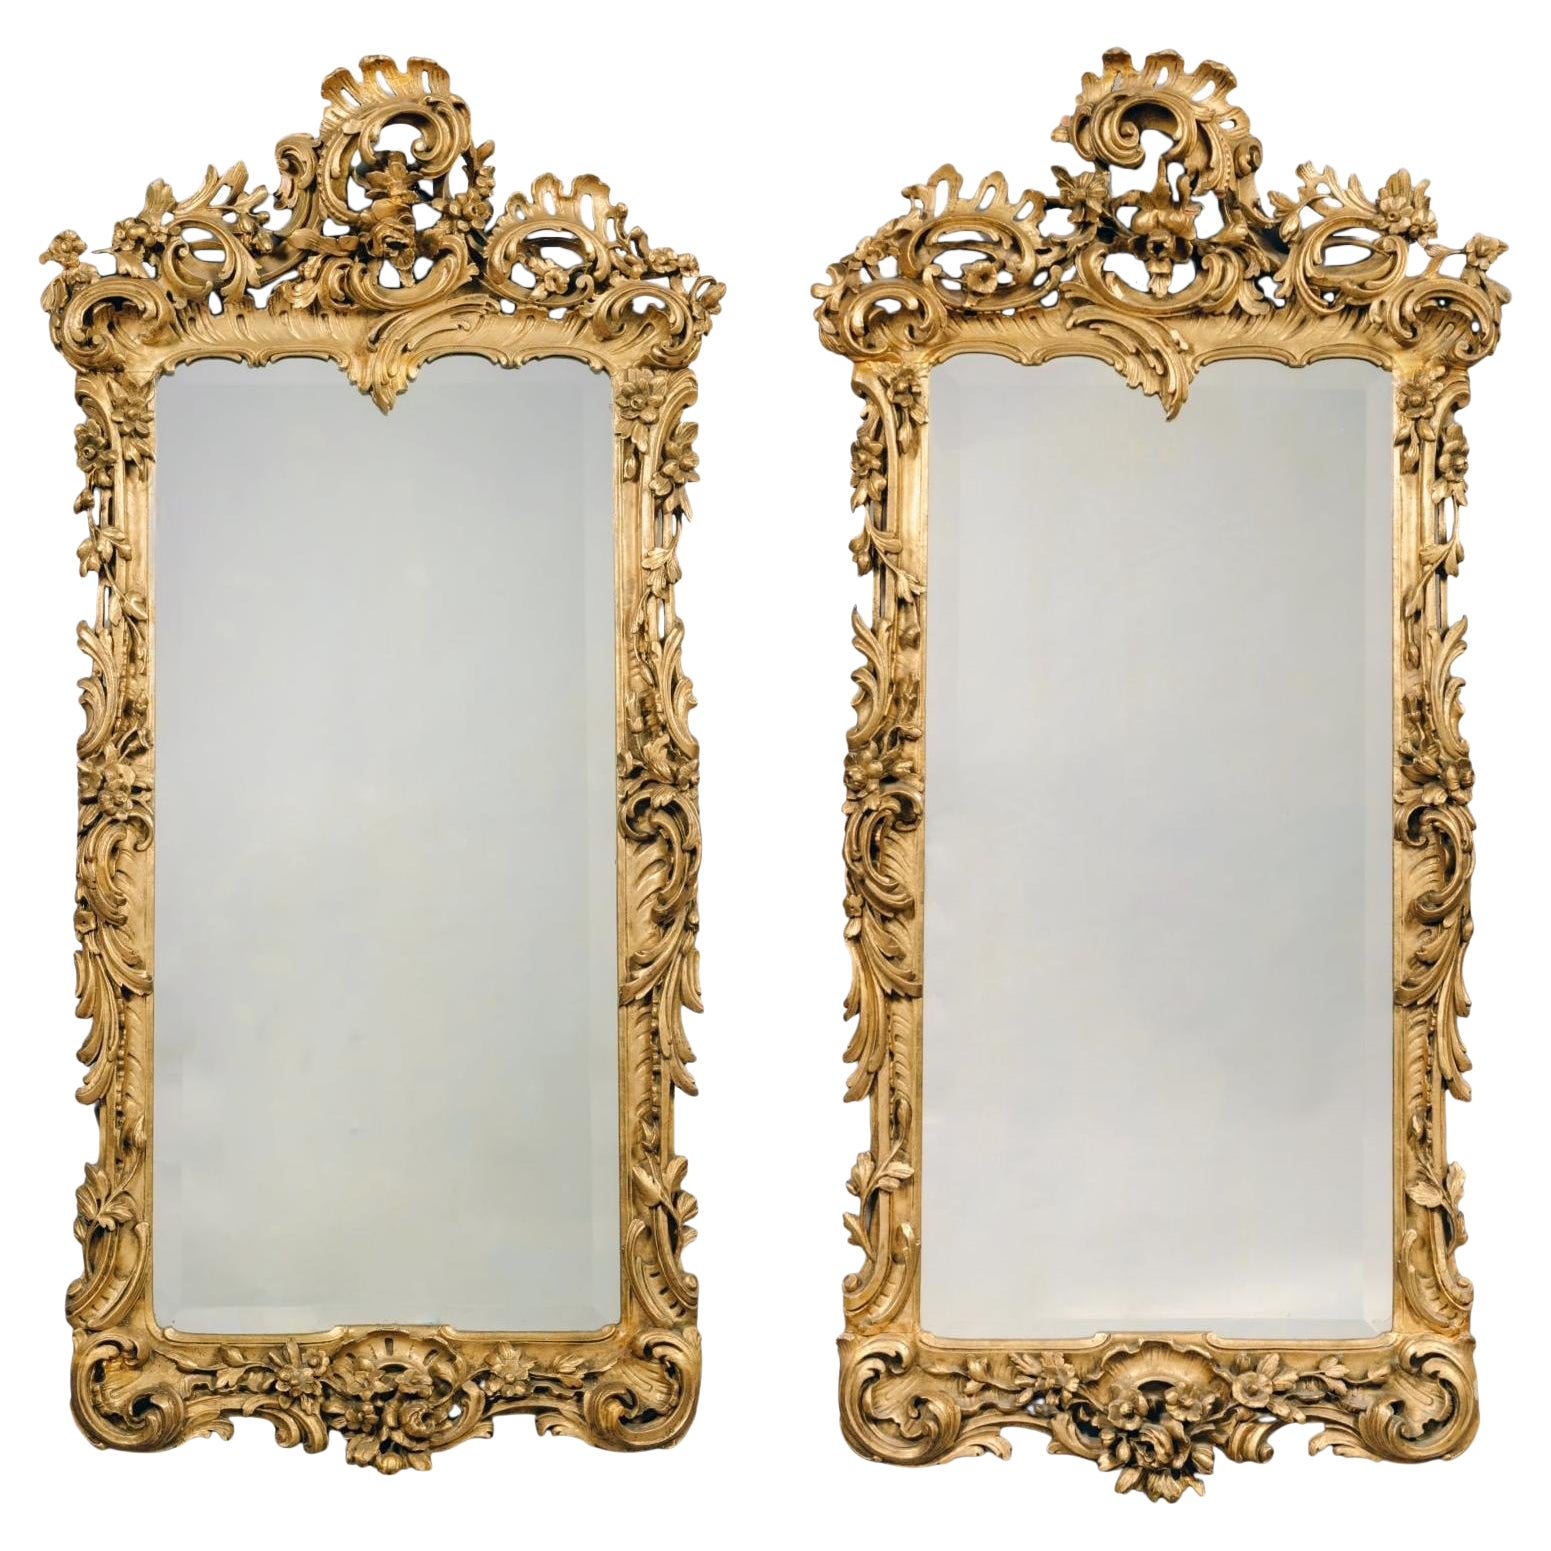 A Fine Pair of George III Style Carved Giltwood Mirrors